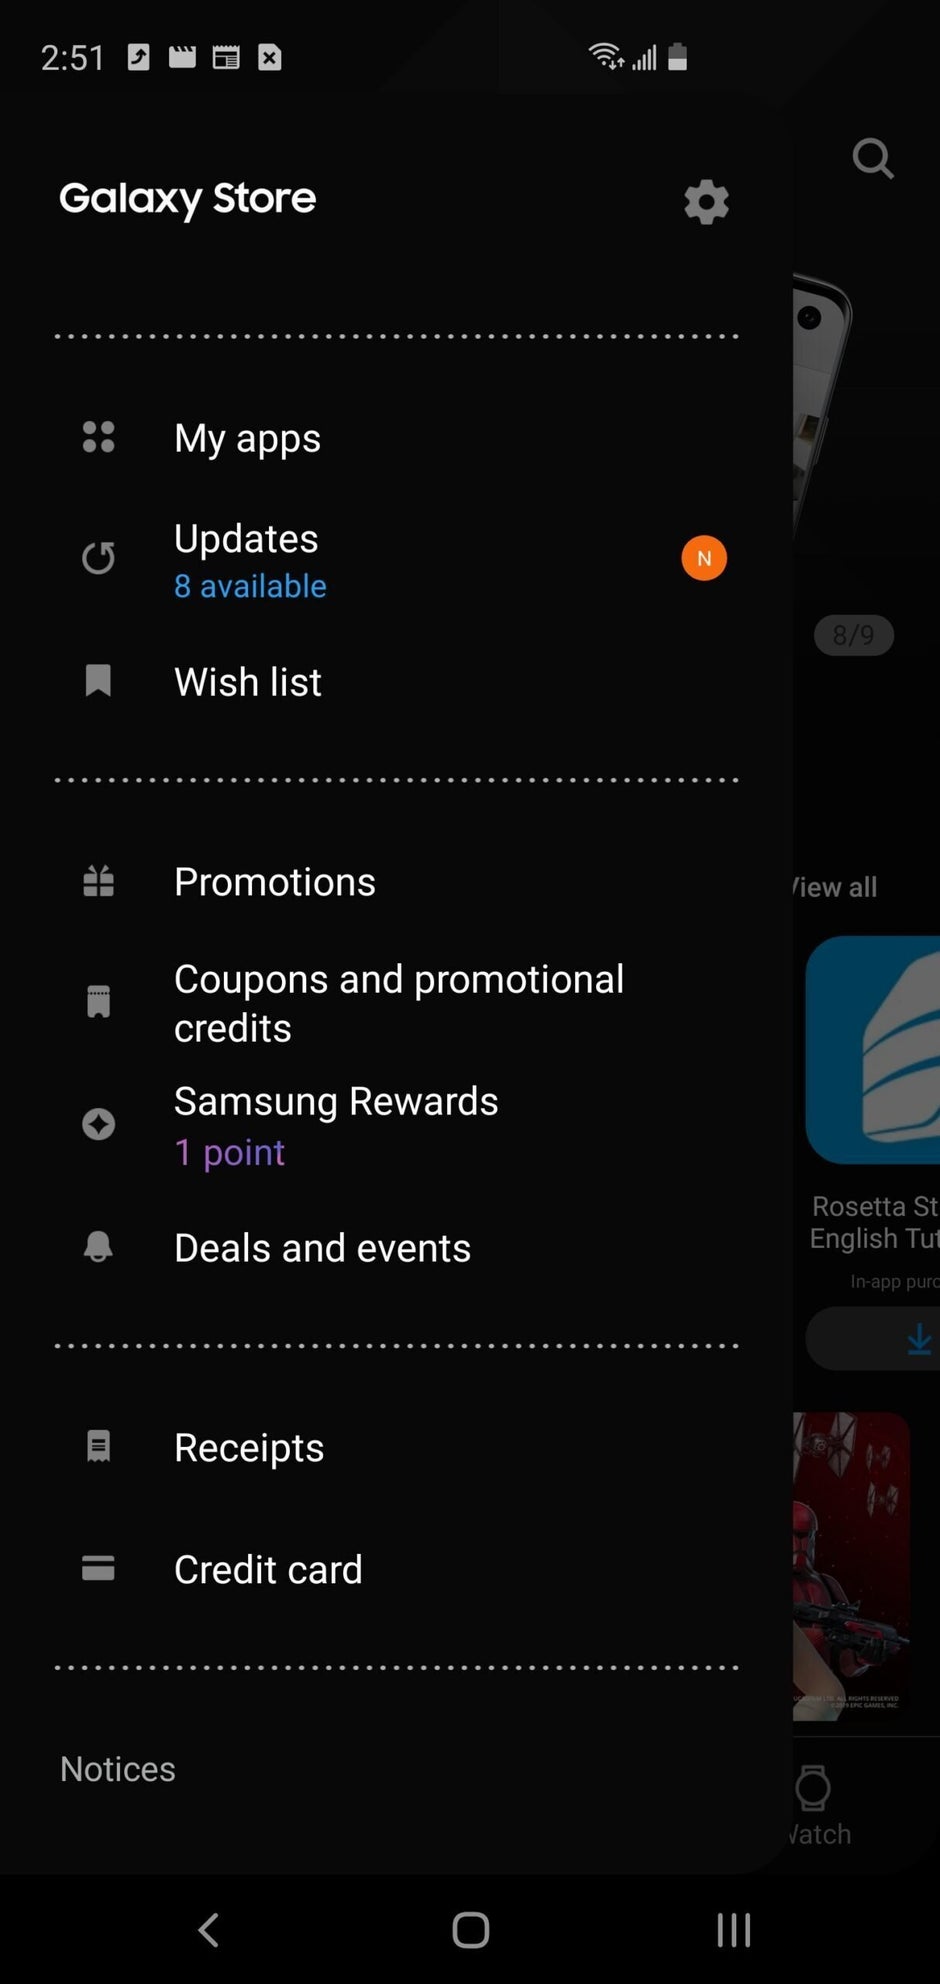 Samsung Galaxy Store dark mode - Samsung rolls out new user interface and dark mode to its store app